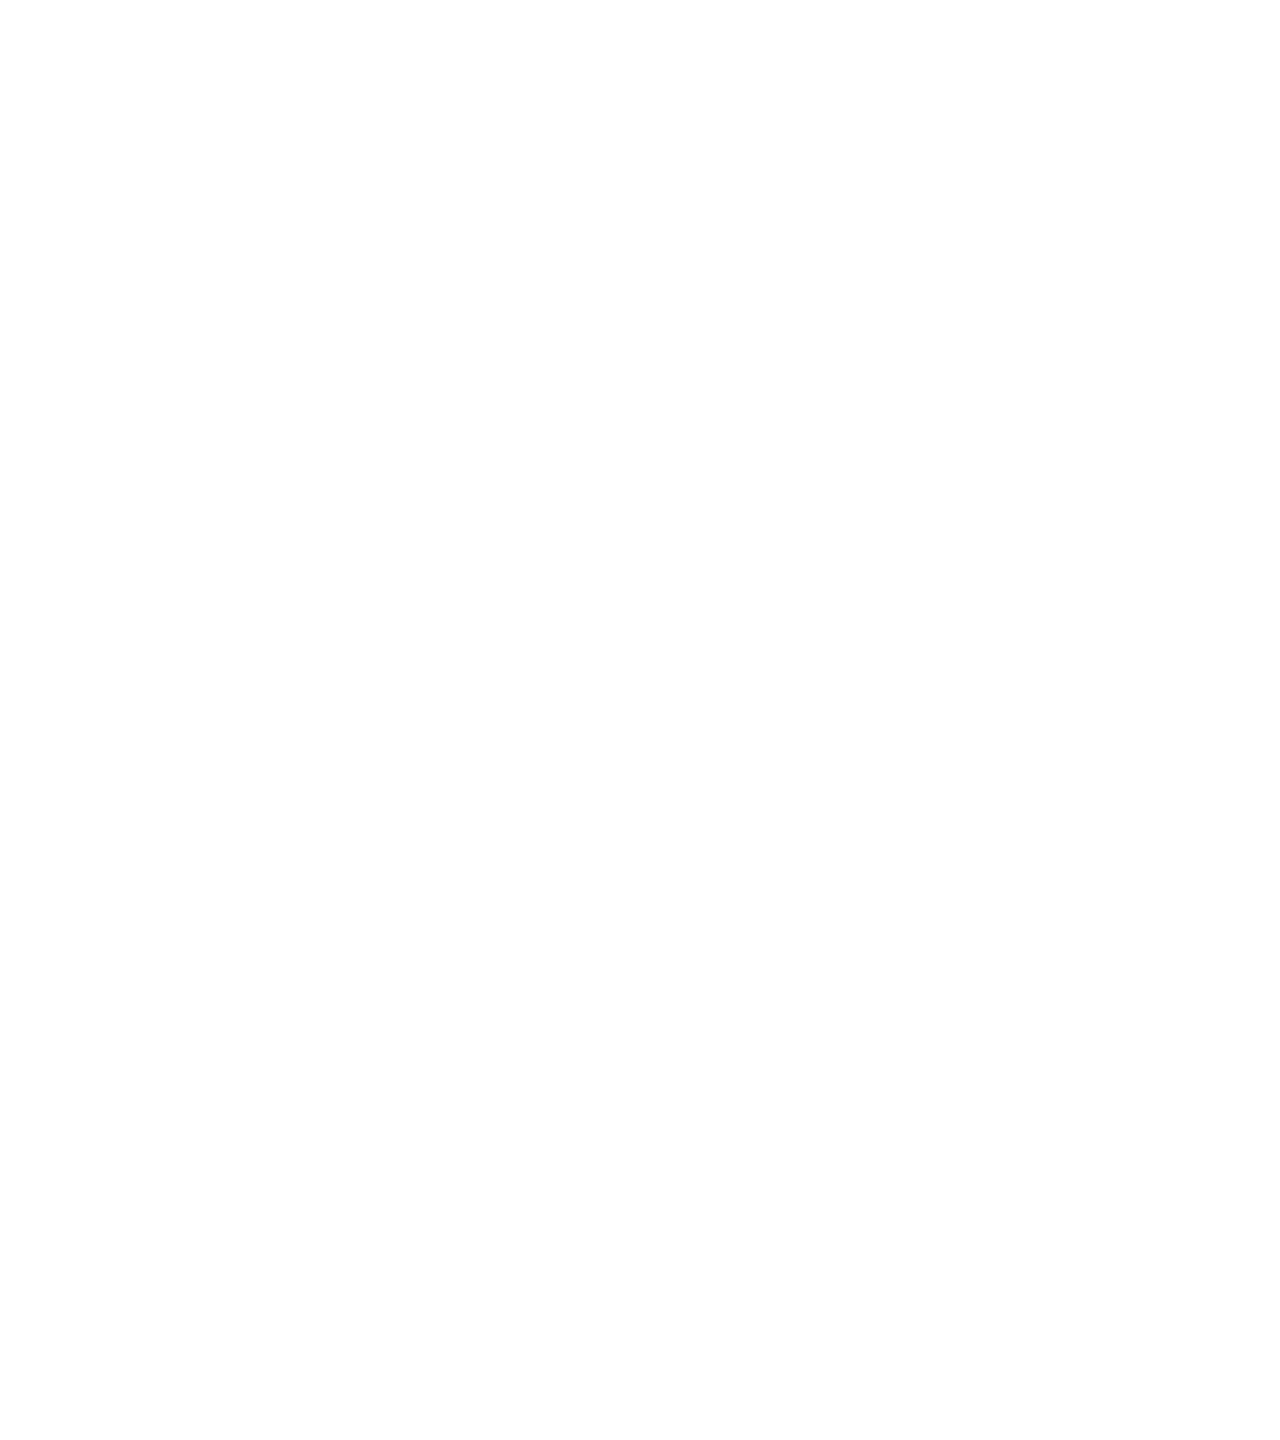 We have global ambitions